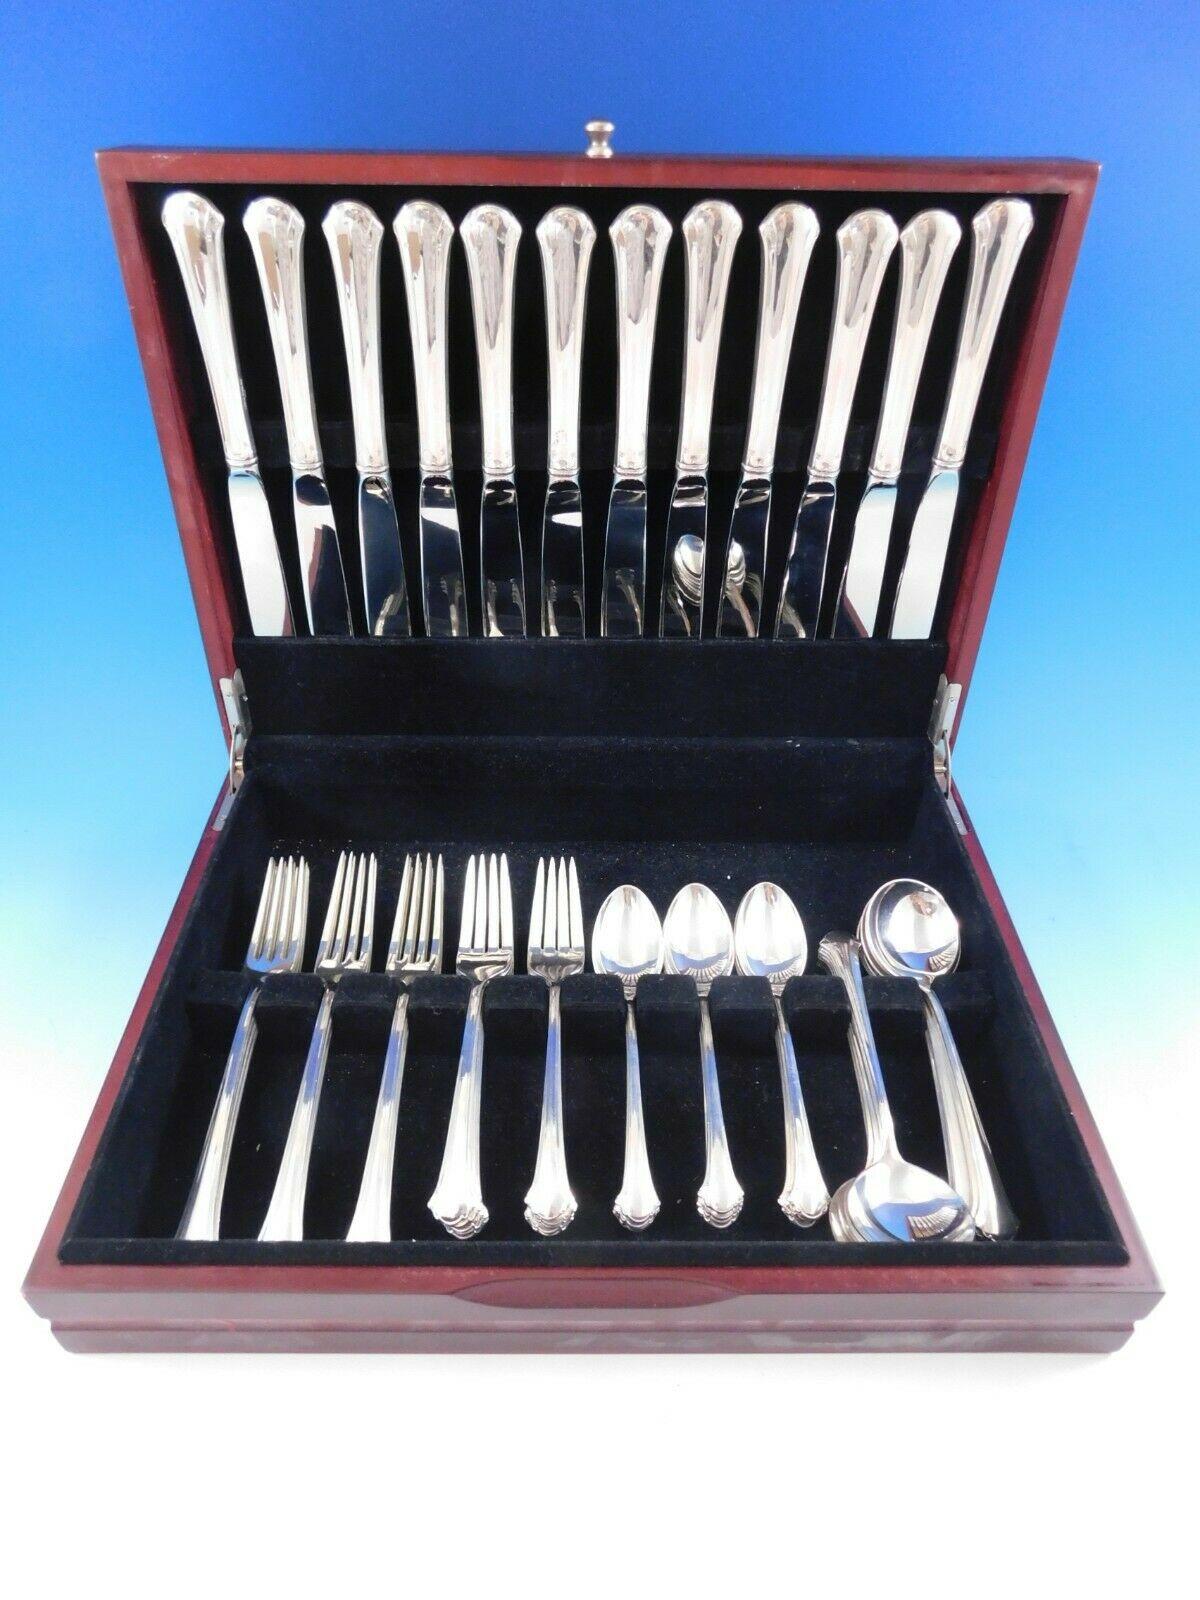 Dinner size Chippendale by Towle sterling silver flatware set - 60 pieces. This set includes:

12 dinner size knives, 9 5/8